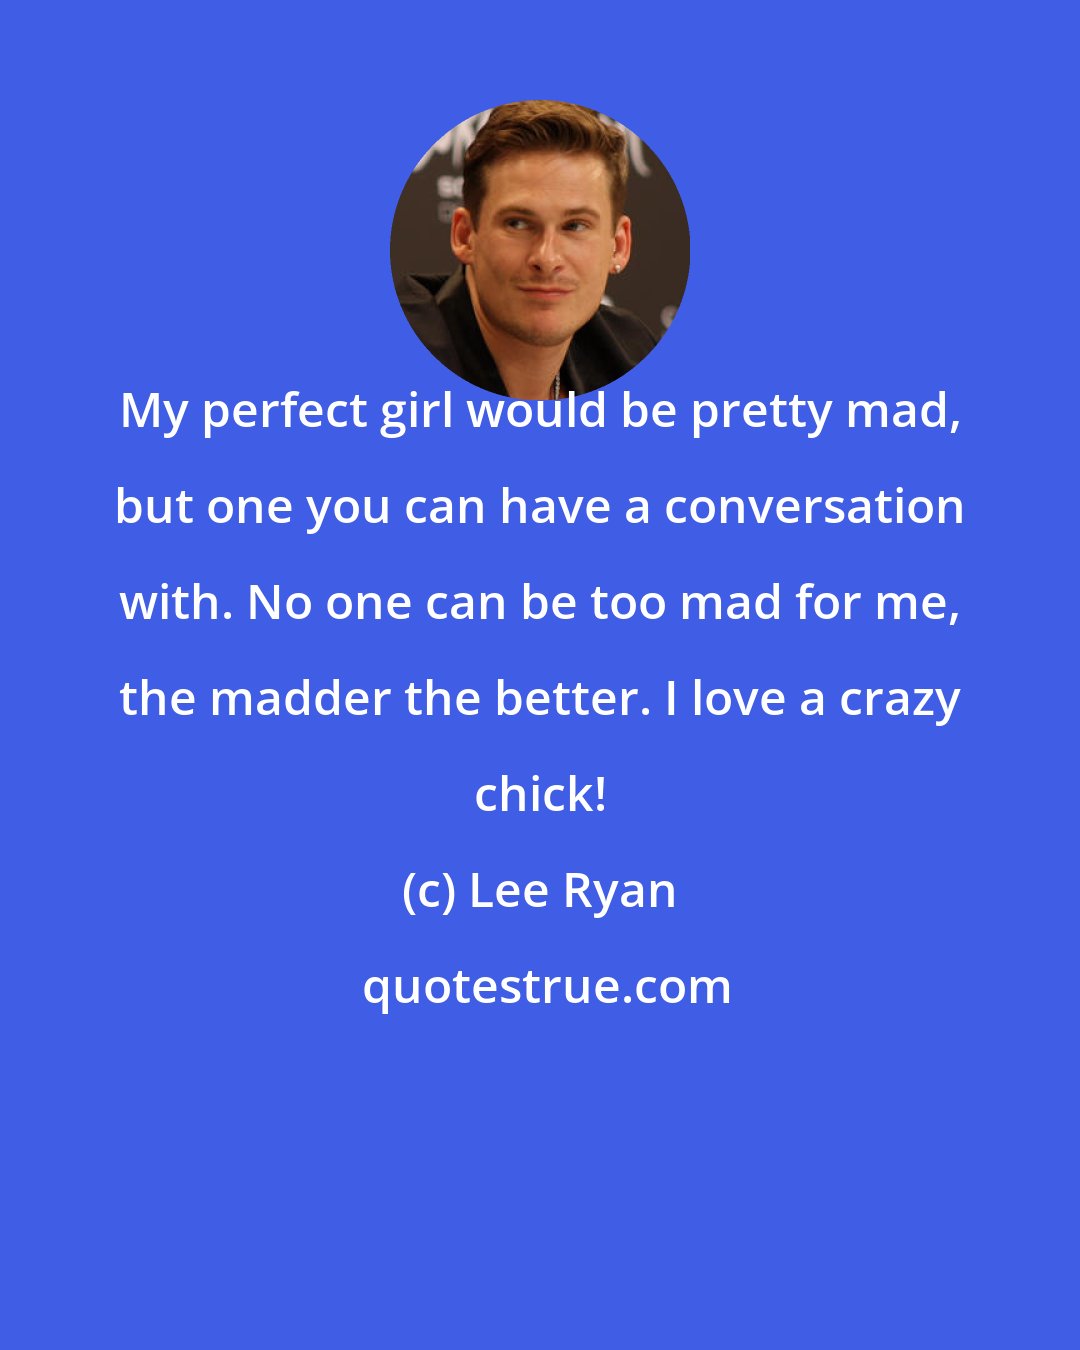 Lee Ryan: My perfect girl would be pretty mad, but one you can have a conversation with. No one can be too mad for me, the madder the better. I love a crazy chick!